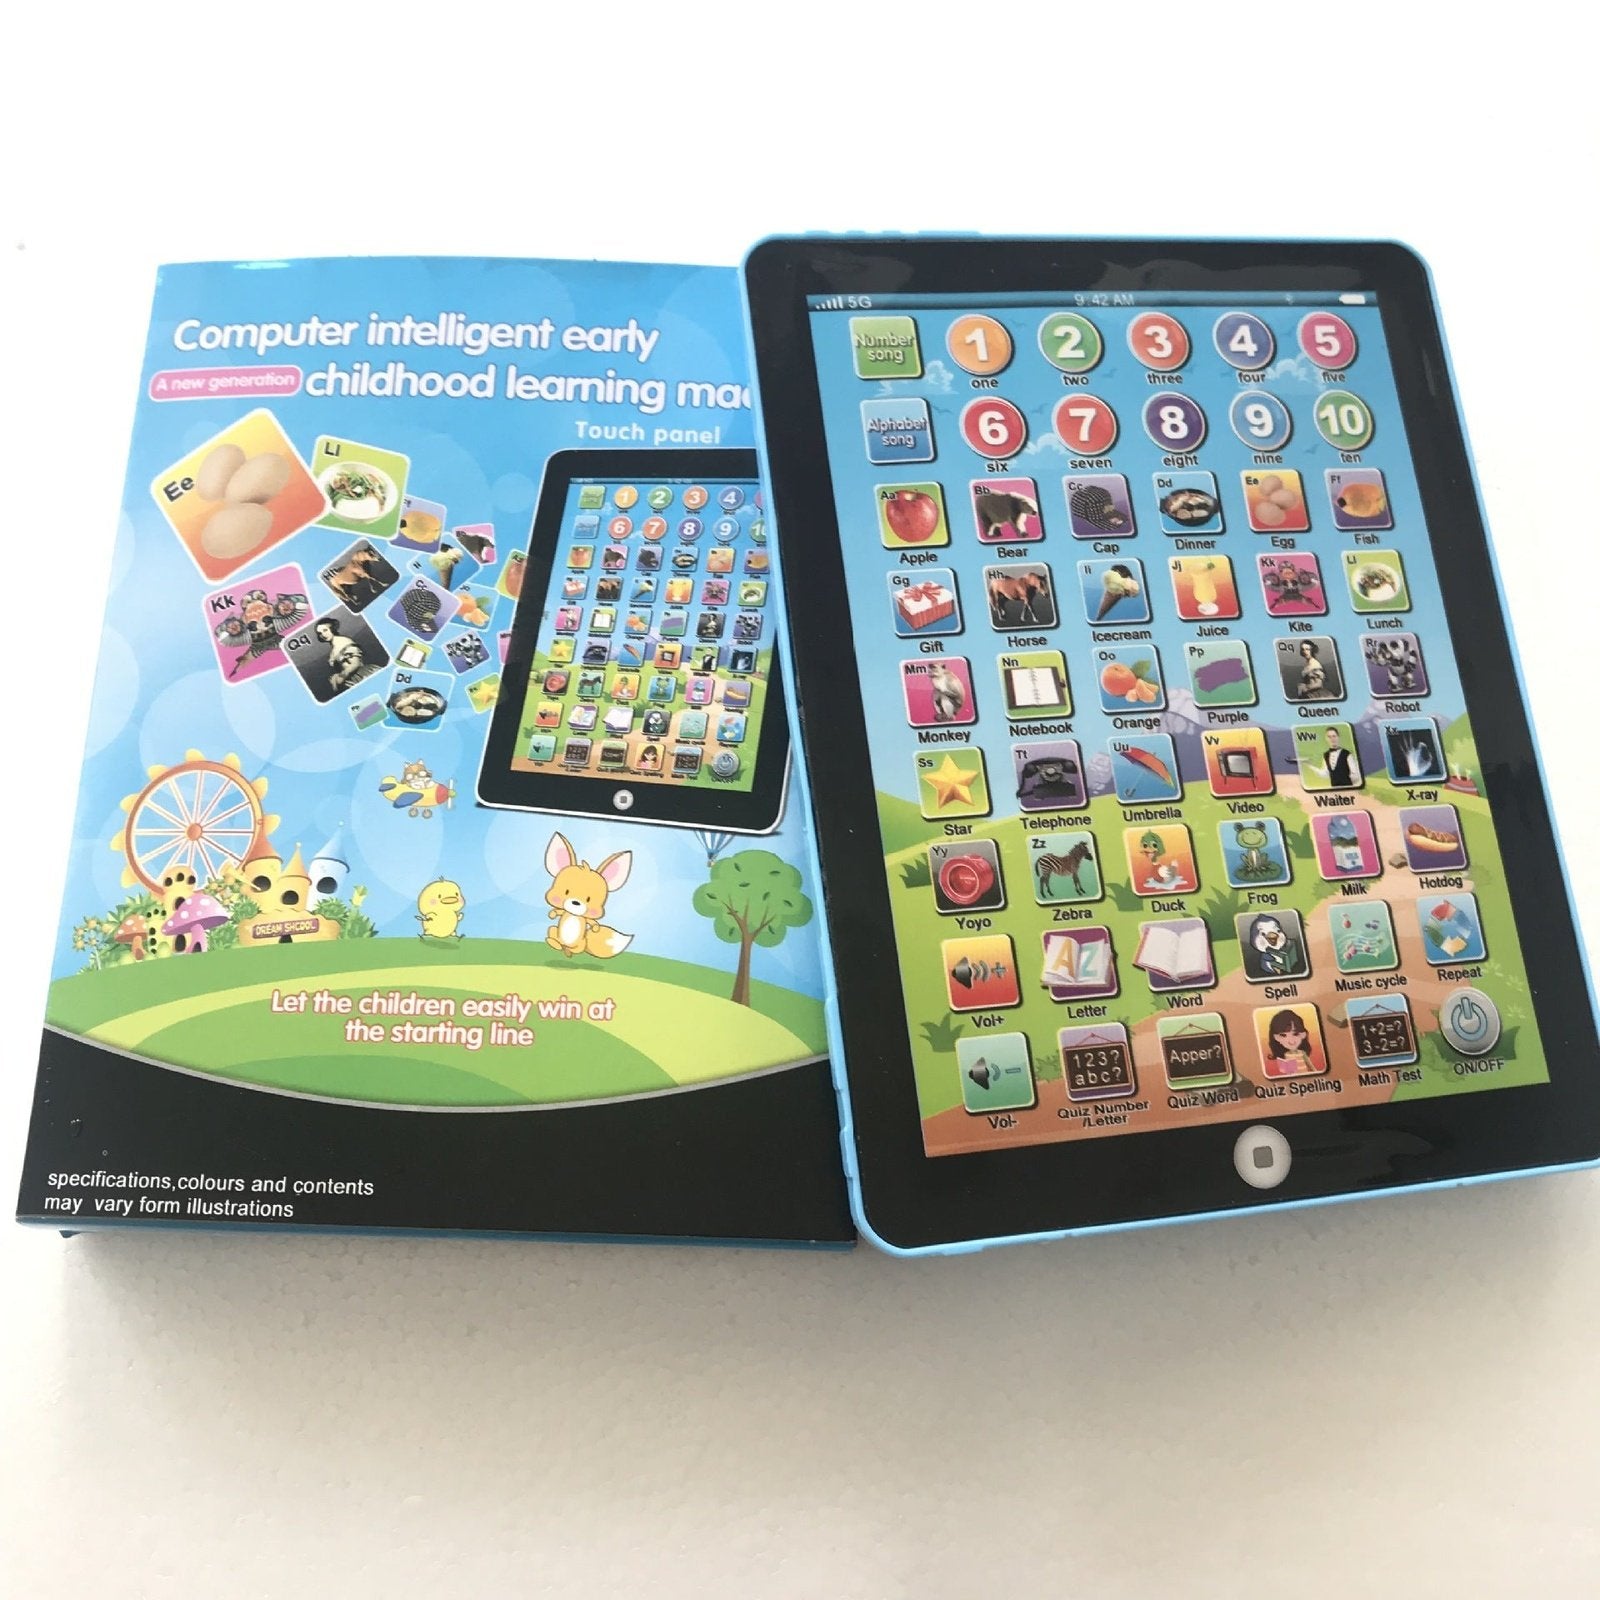 Early Education Point Reading Machine: An Interactive Toy Tablet For Kids To Learn And Have Fun - Cykapu